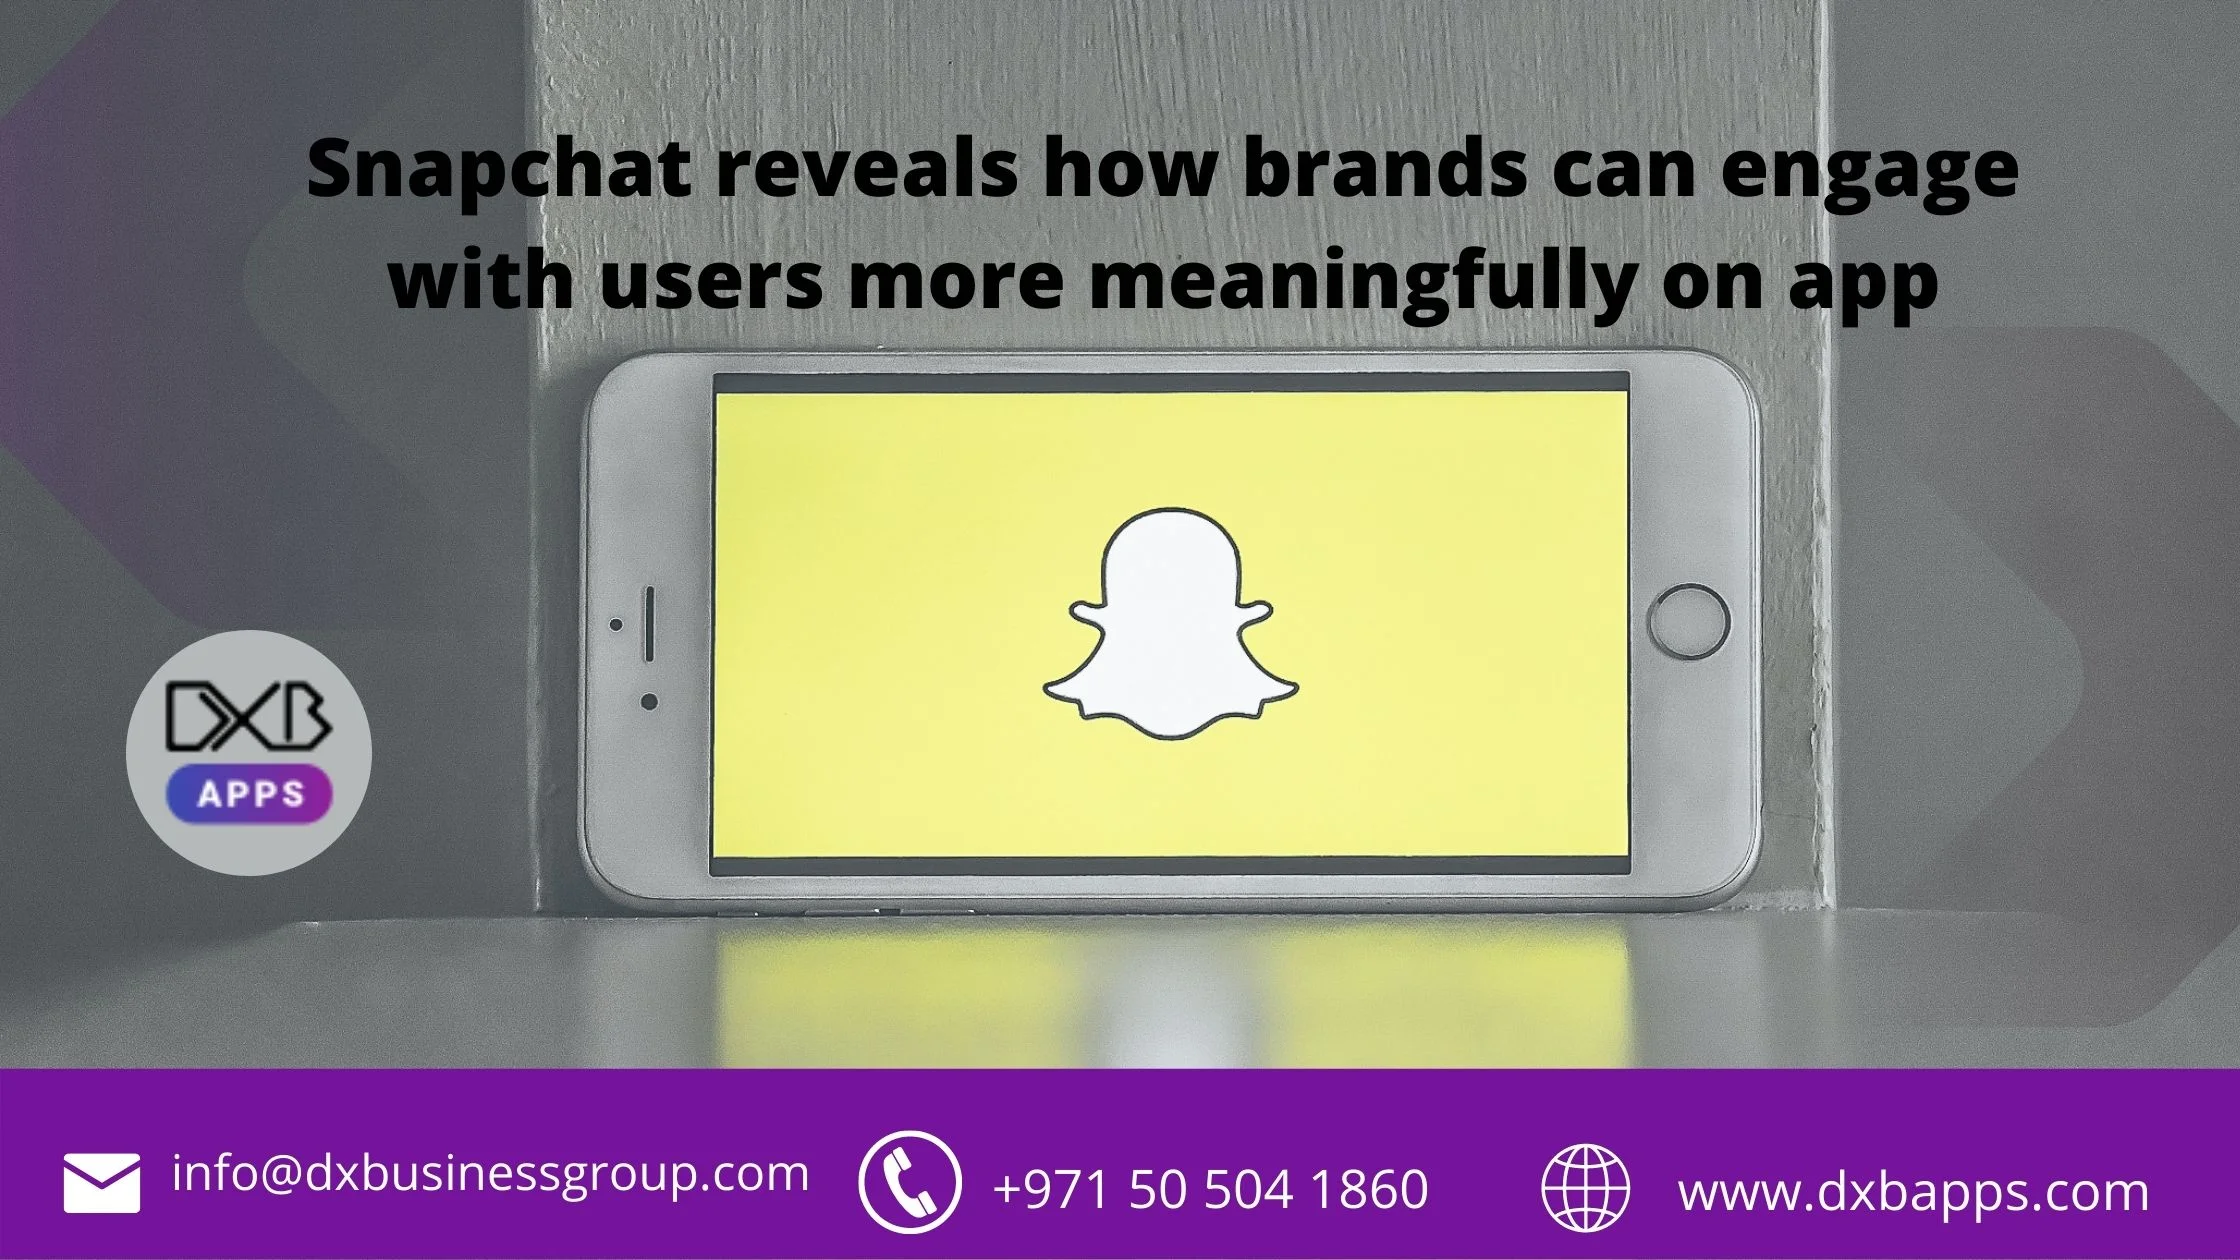 Snapchat reveals how brands can engage with users more meaningfully on app